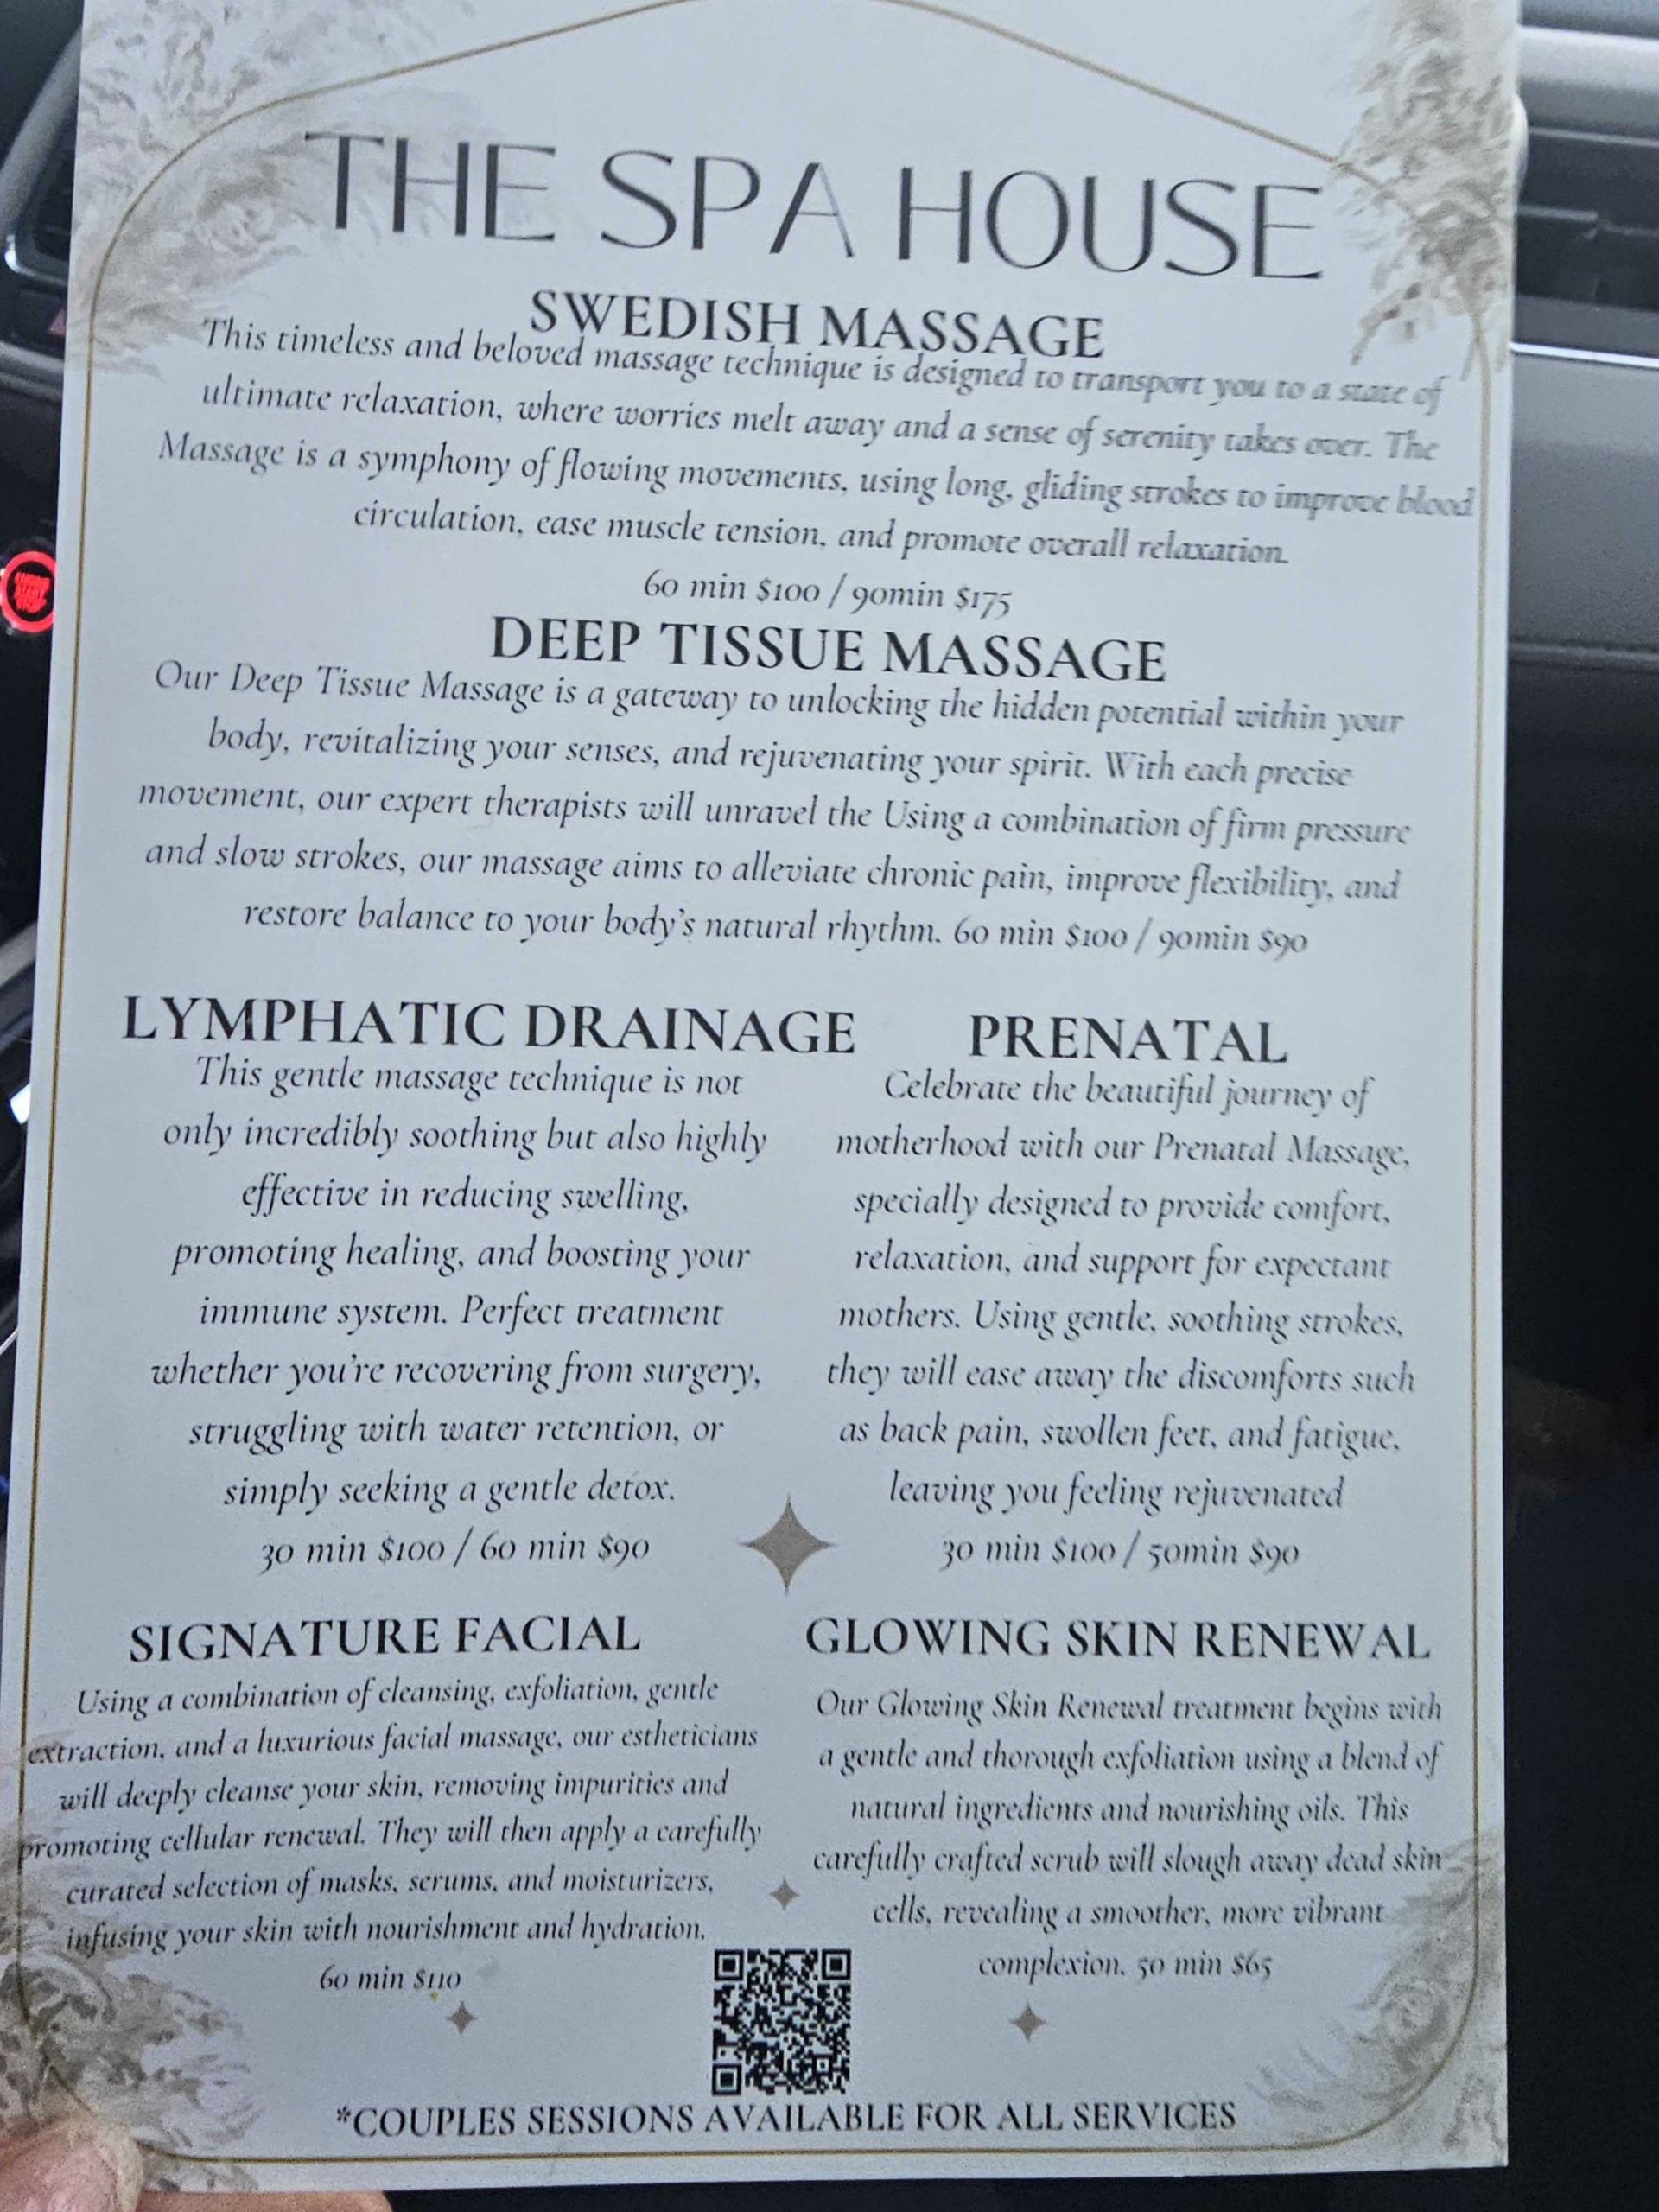 Spa menu from The Spa house by queencare